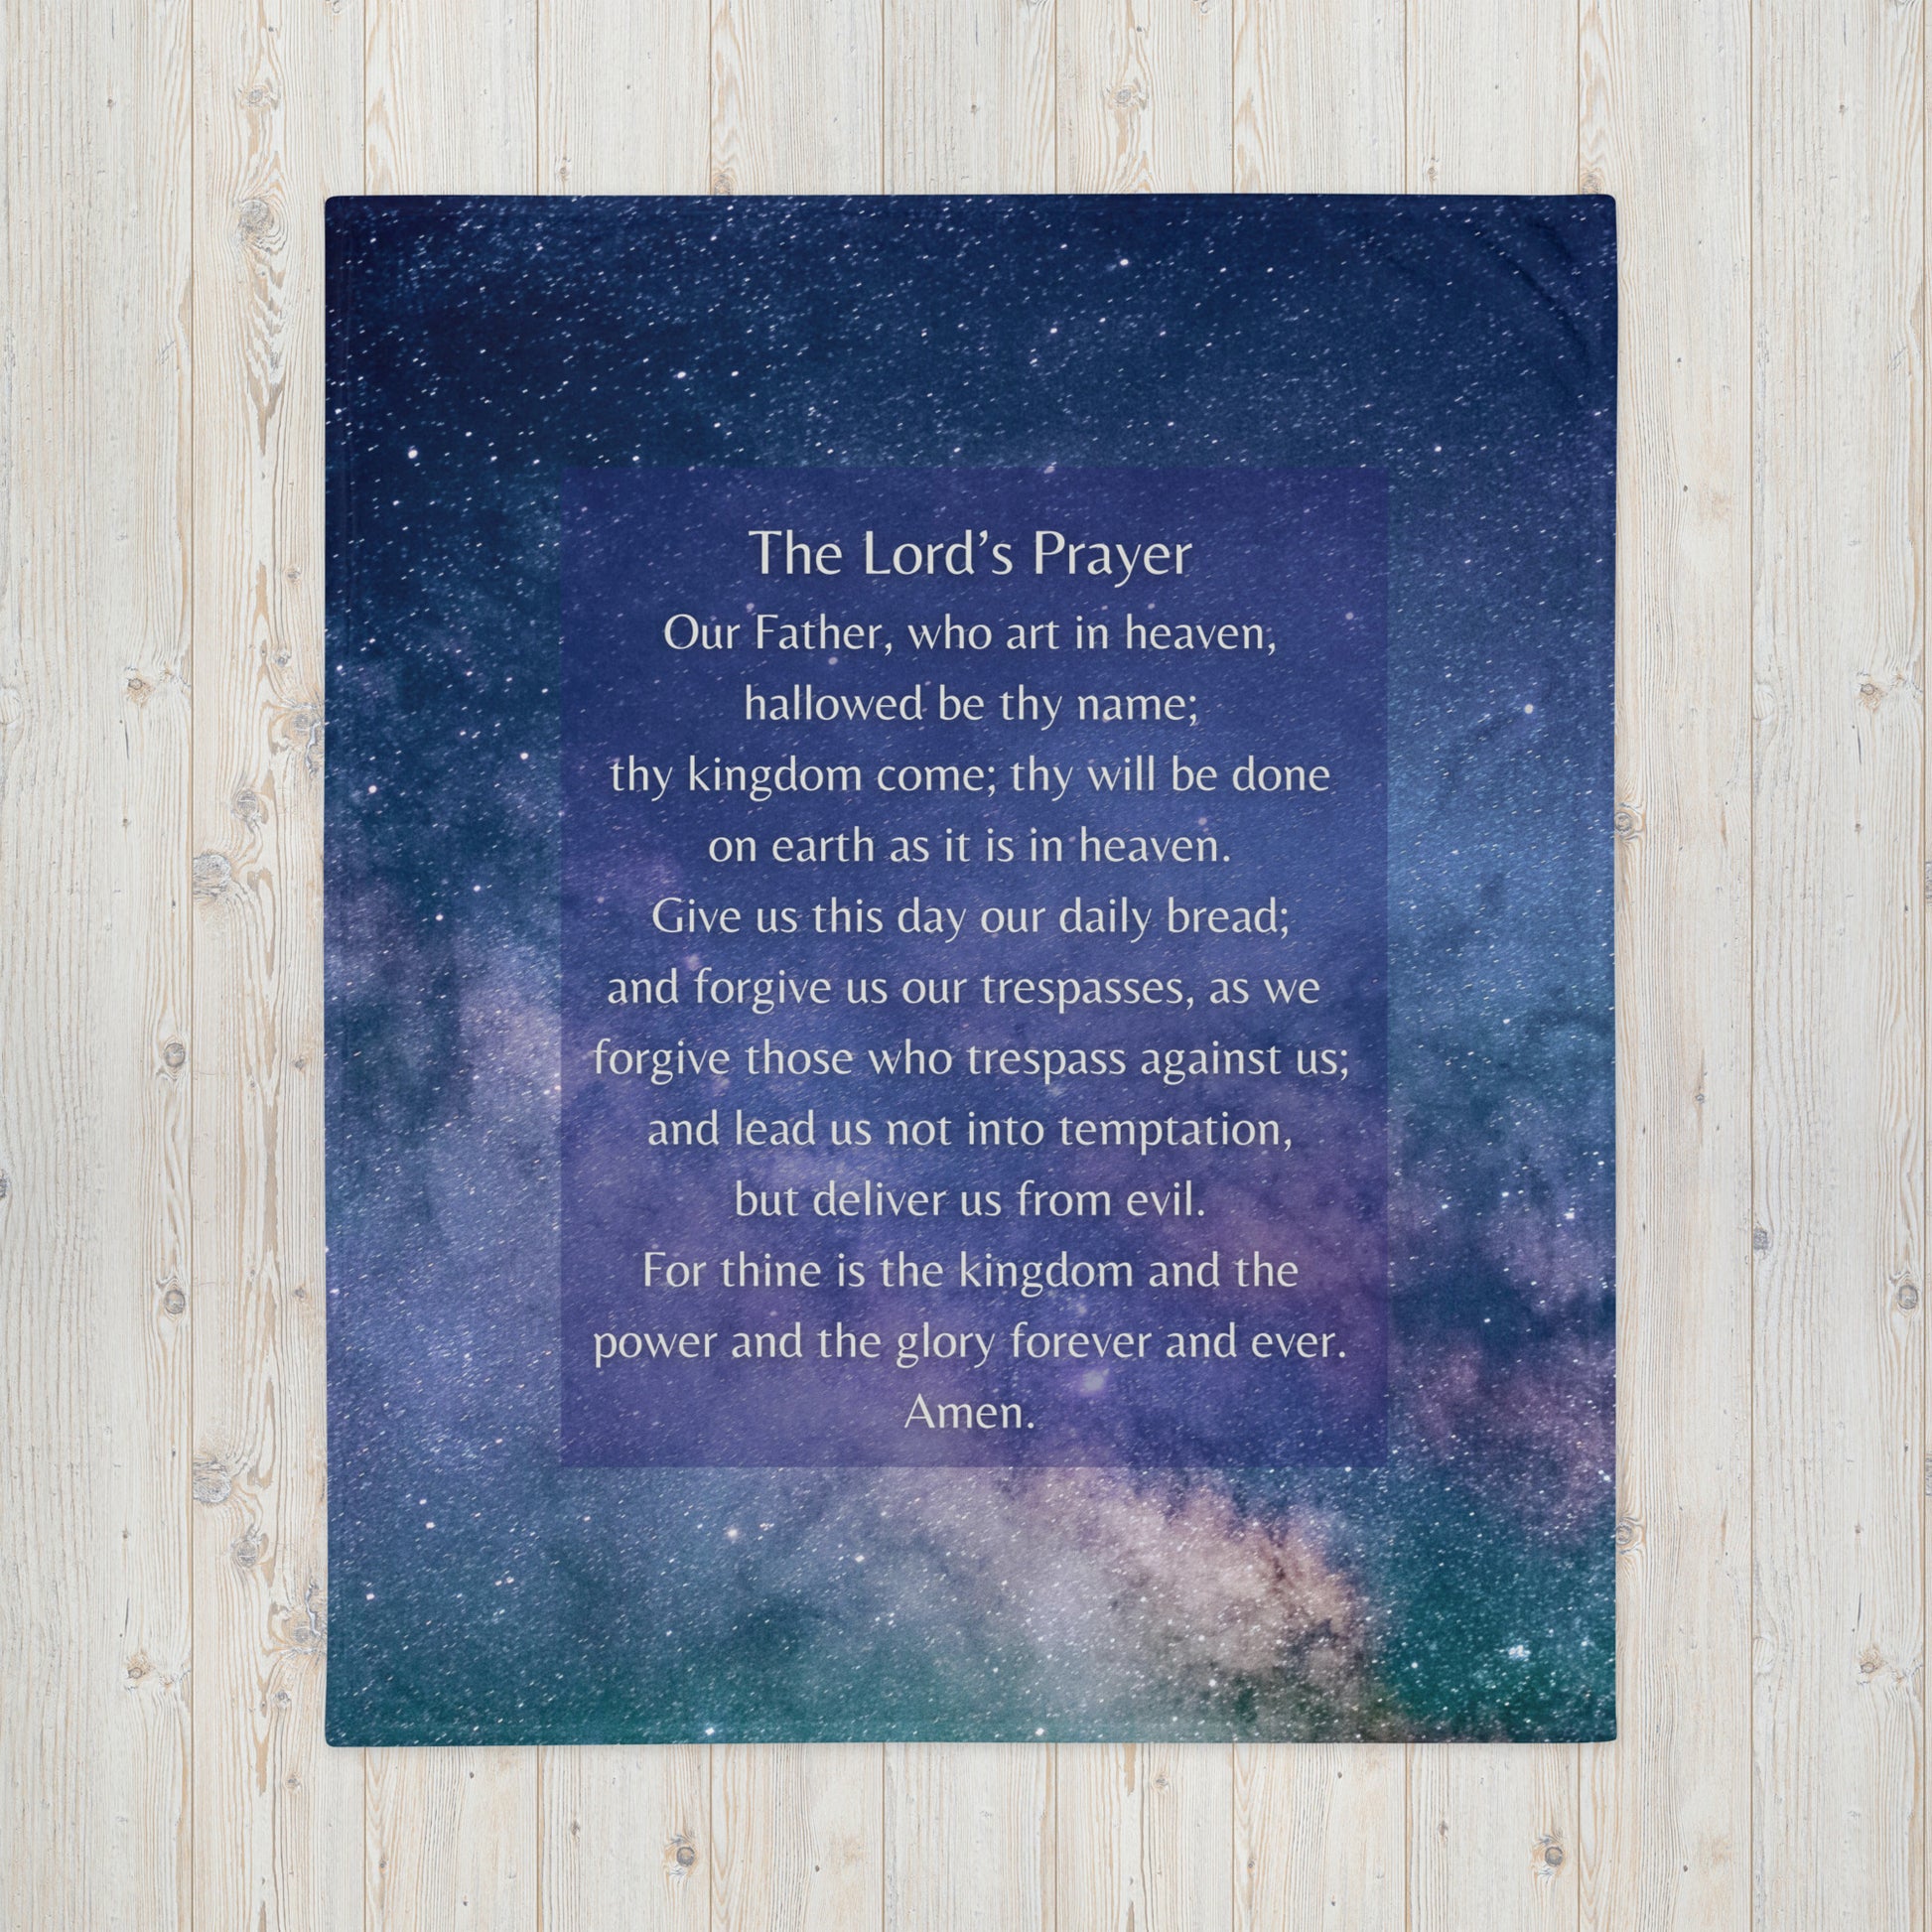 The Lord's Prayer printed on a throw blanket with a starry sky background